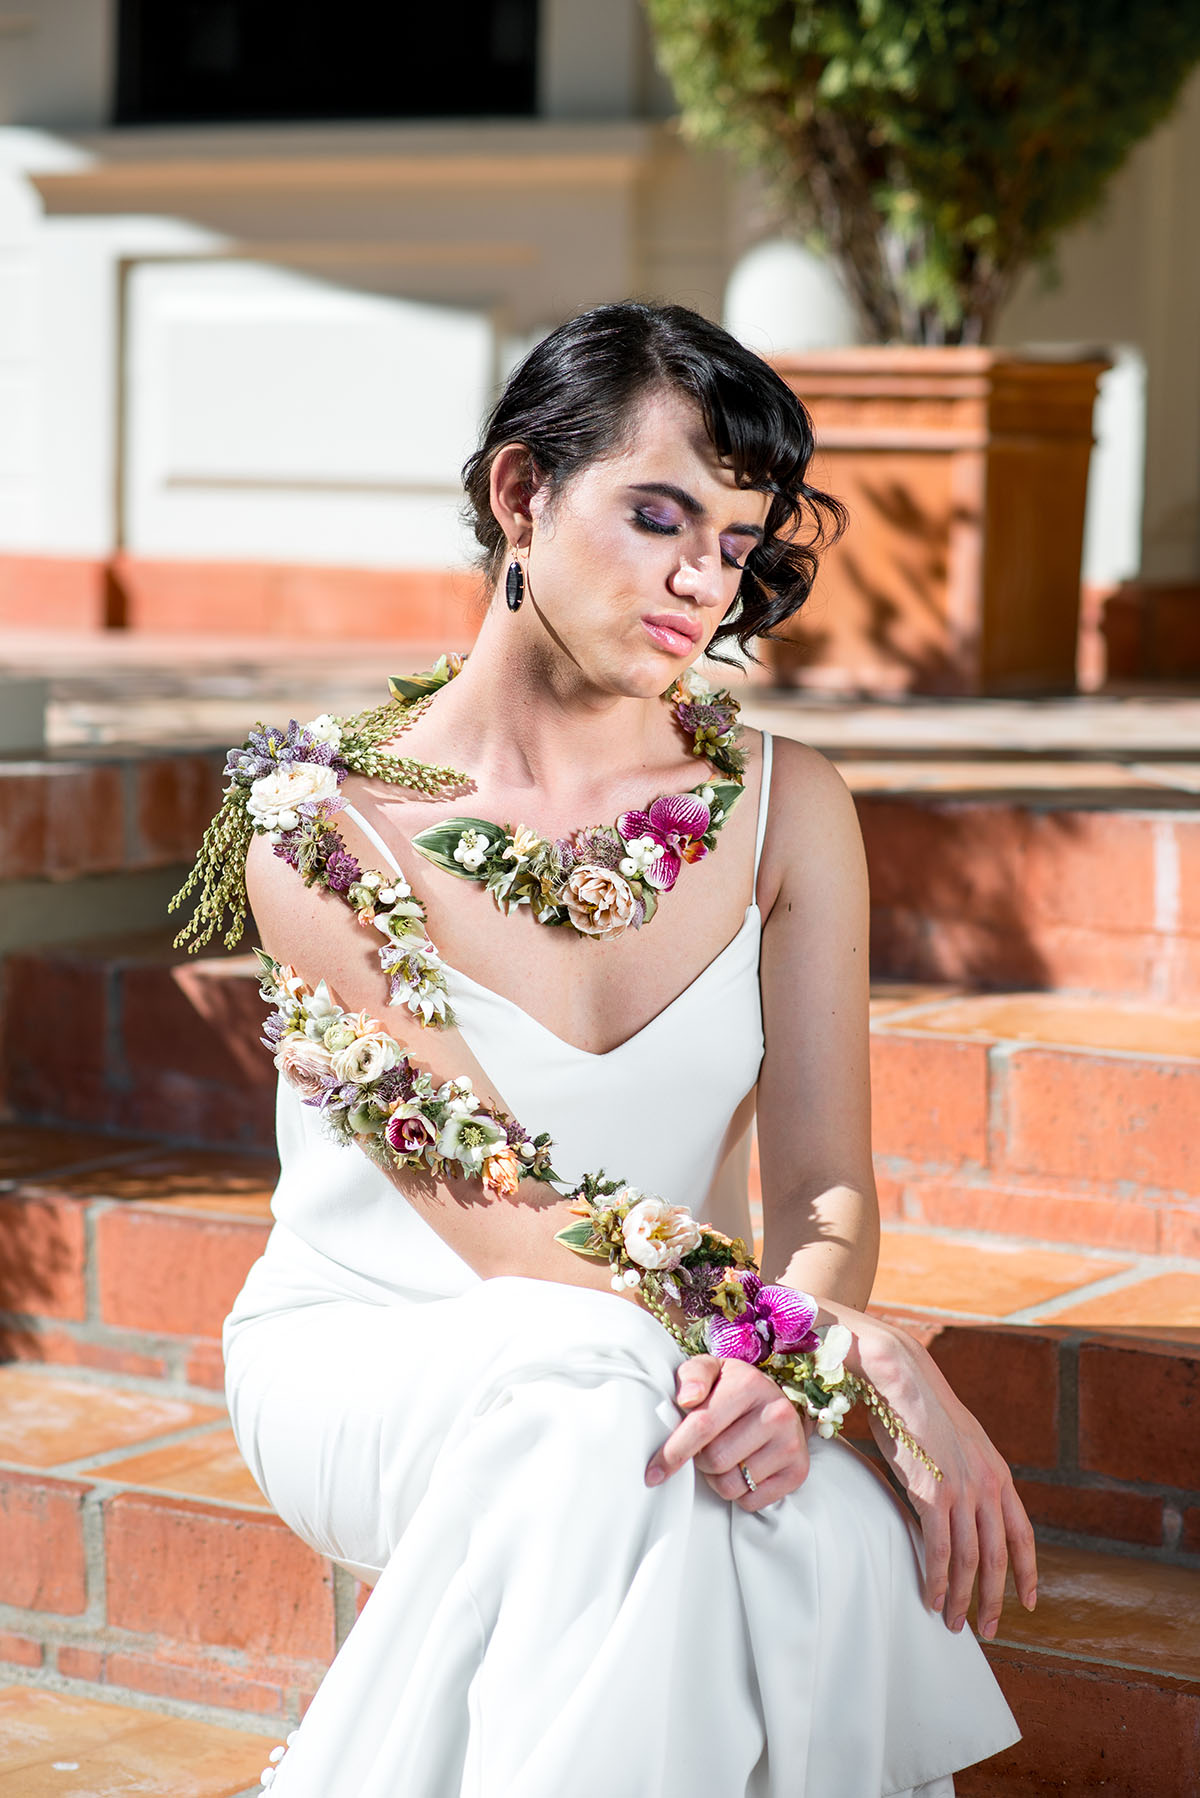 Moody floral fairy tale wedding inspiration with fashion from three eras contemporary vintage modern trans wedding looks dresses hair makeup bridal beauty LGBTQ+